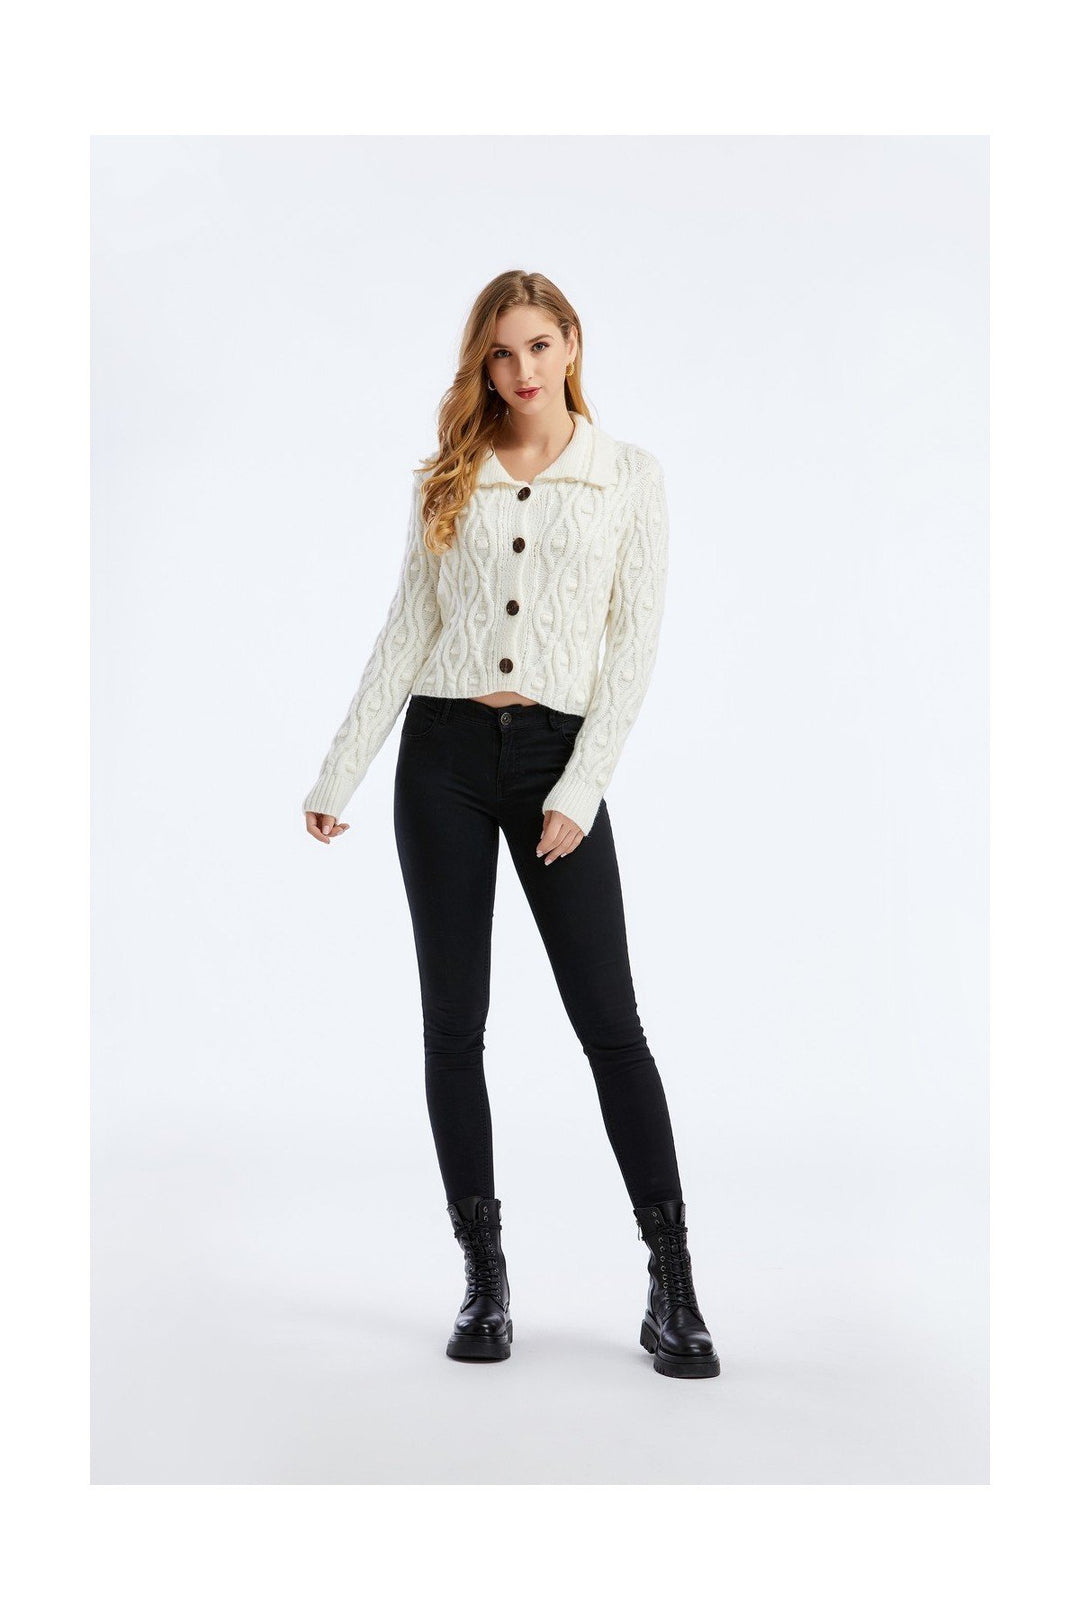 White Long Sleeve Gilet Sweater - Full Front View